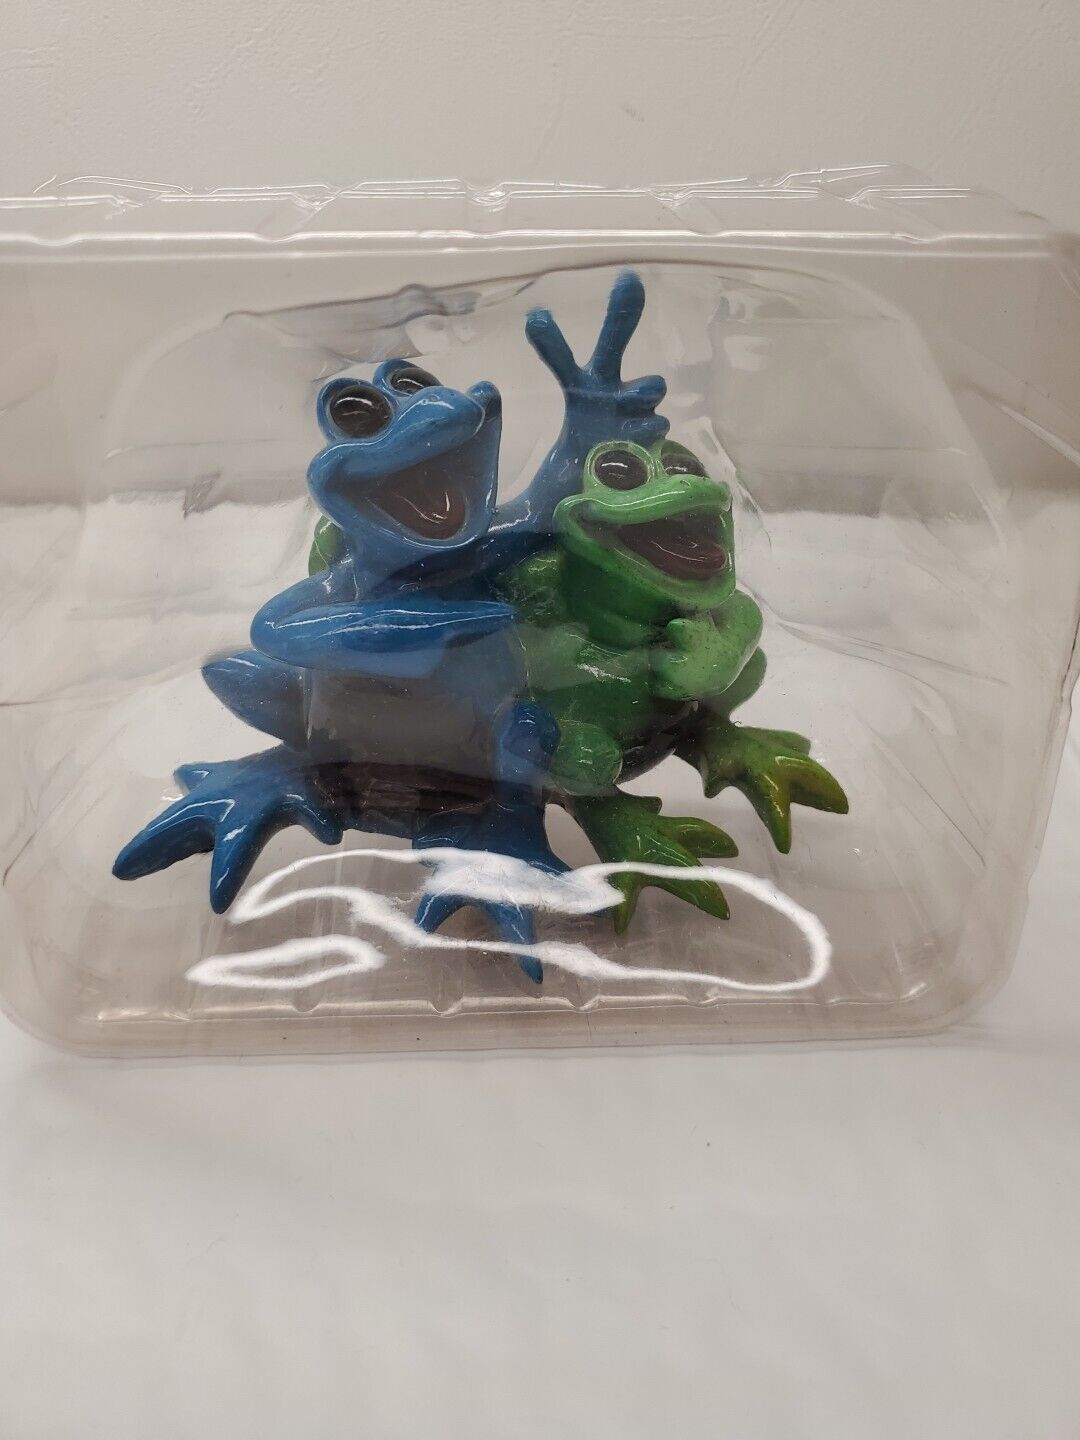 Kitty's Critters Frogs Buddies Blue Green 2007 Resin Friends Pals Peace Collect